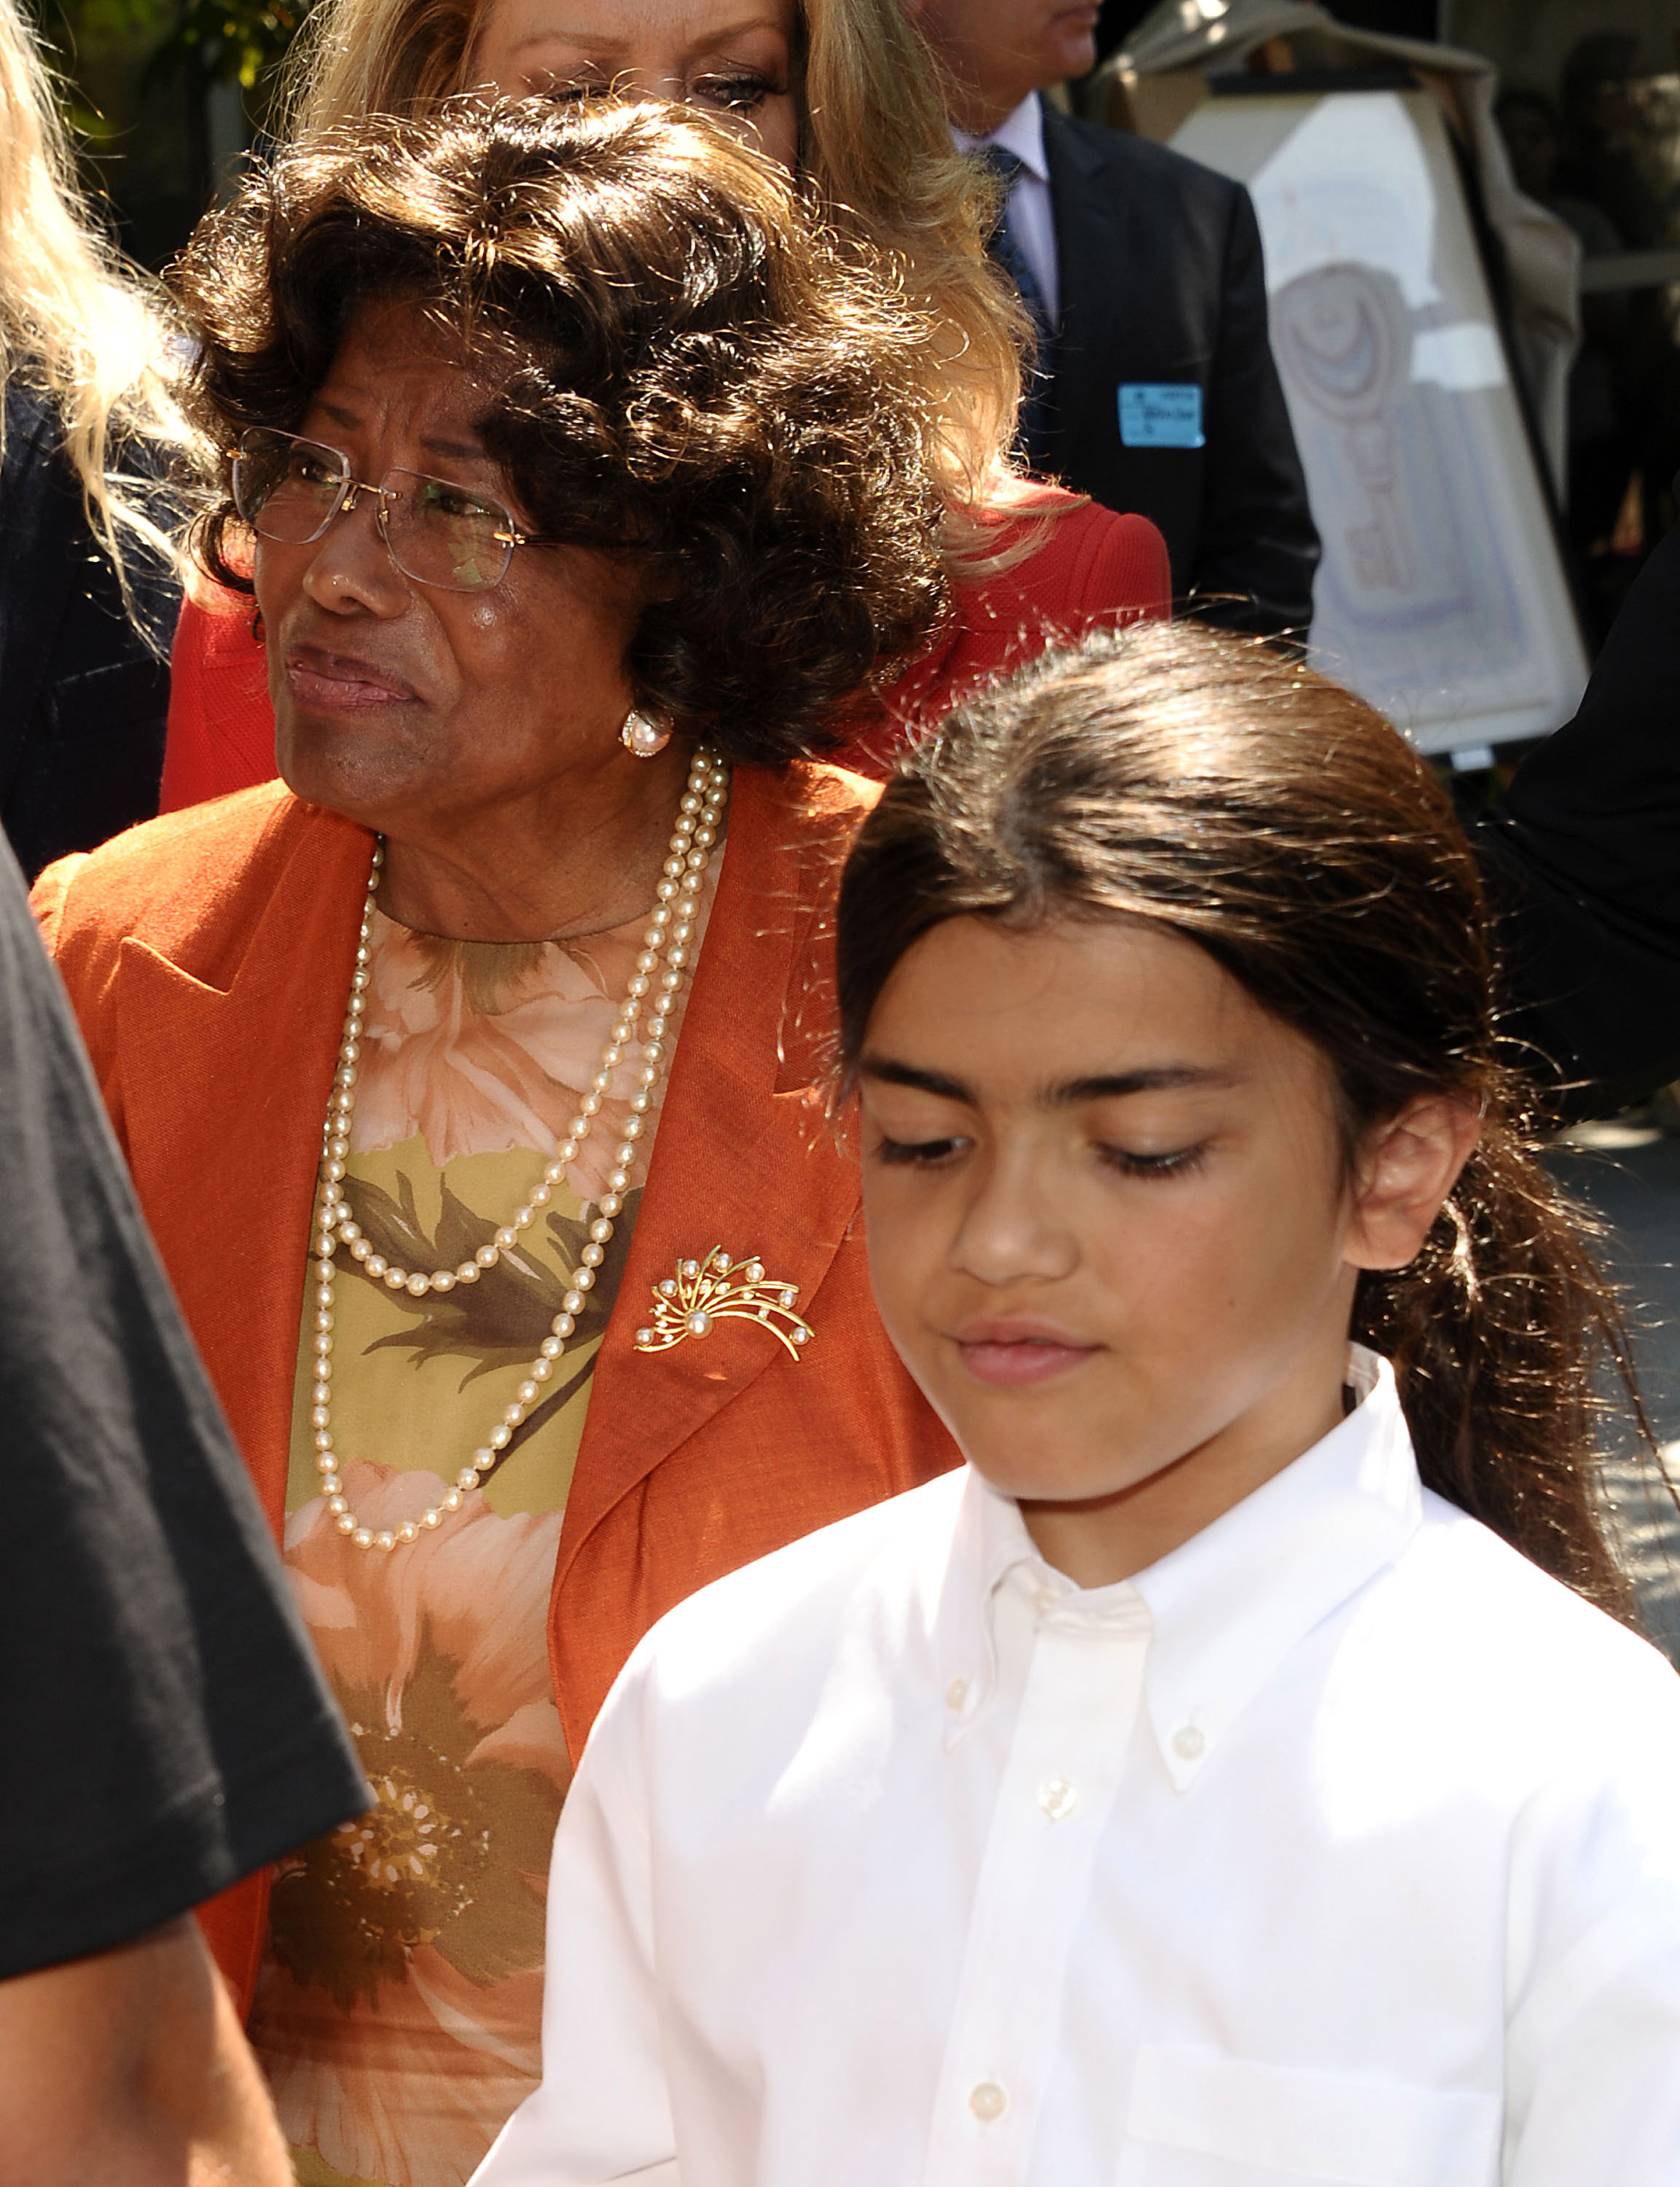 Katherine Jackson and Bigi Jackson at the Jackson Family donation event at Children's Hospital Los Angeles on August 8, 2011. | Source: Getty Images